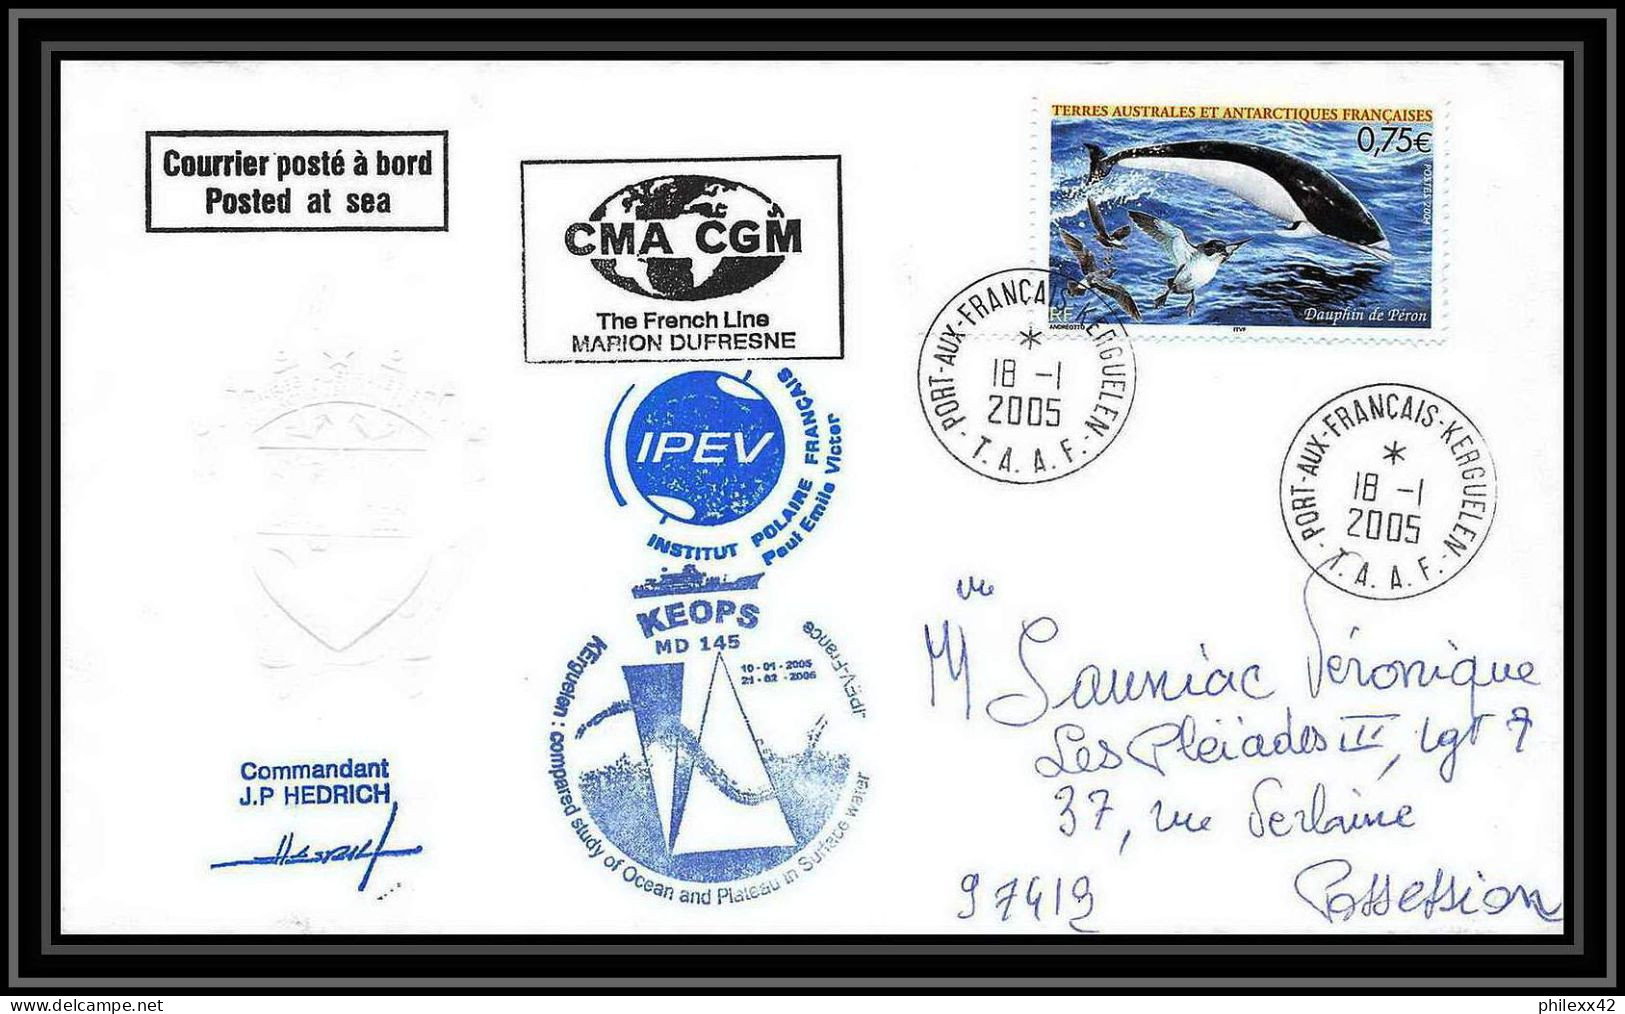 2497 ANTARCTIC Terres Australes TAAF Lettre Cover Dufresne 2 Signé Signed MD 145 KEOPS 18/1/2005 N°385 Dauphin Dolphin - Antarktis-Expeditionen